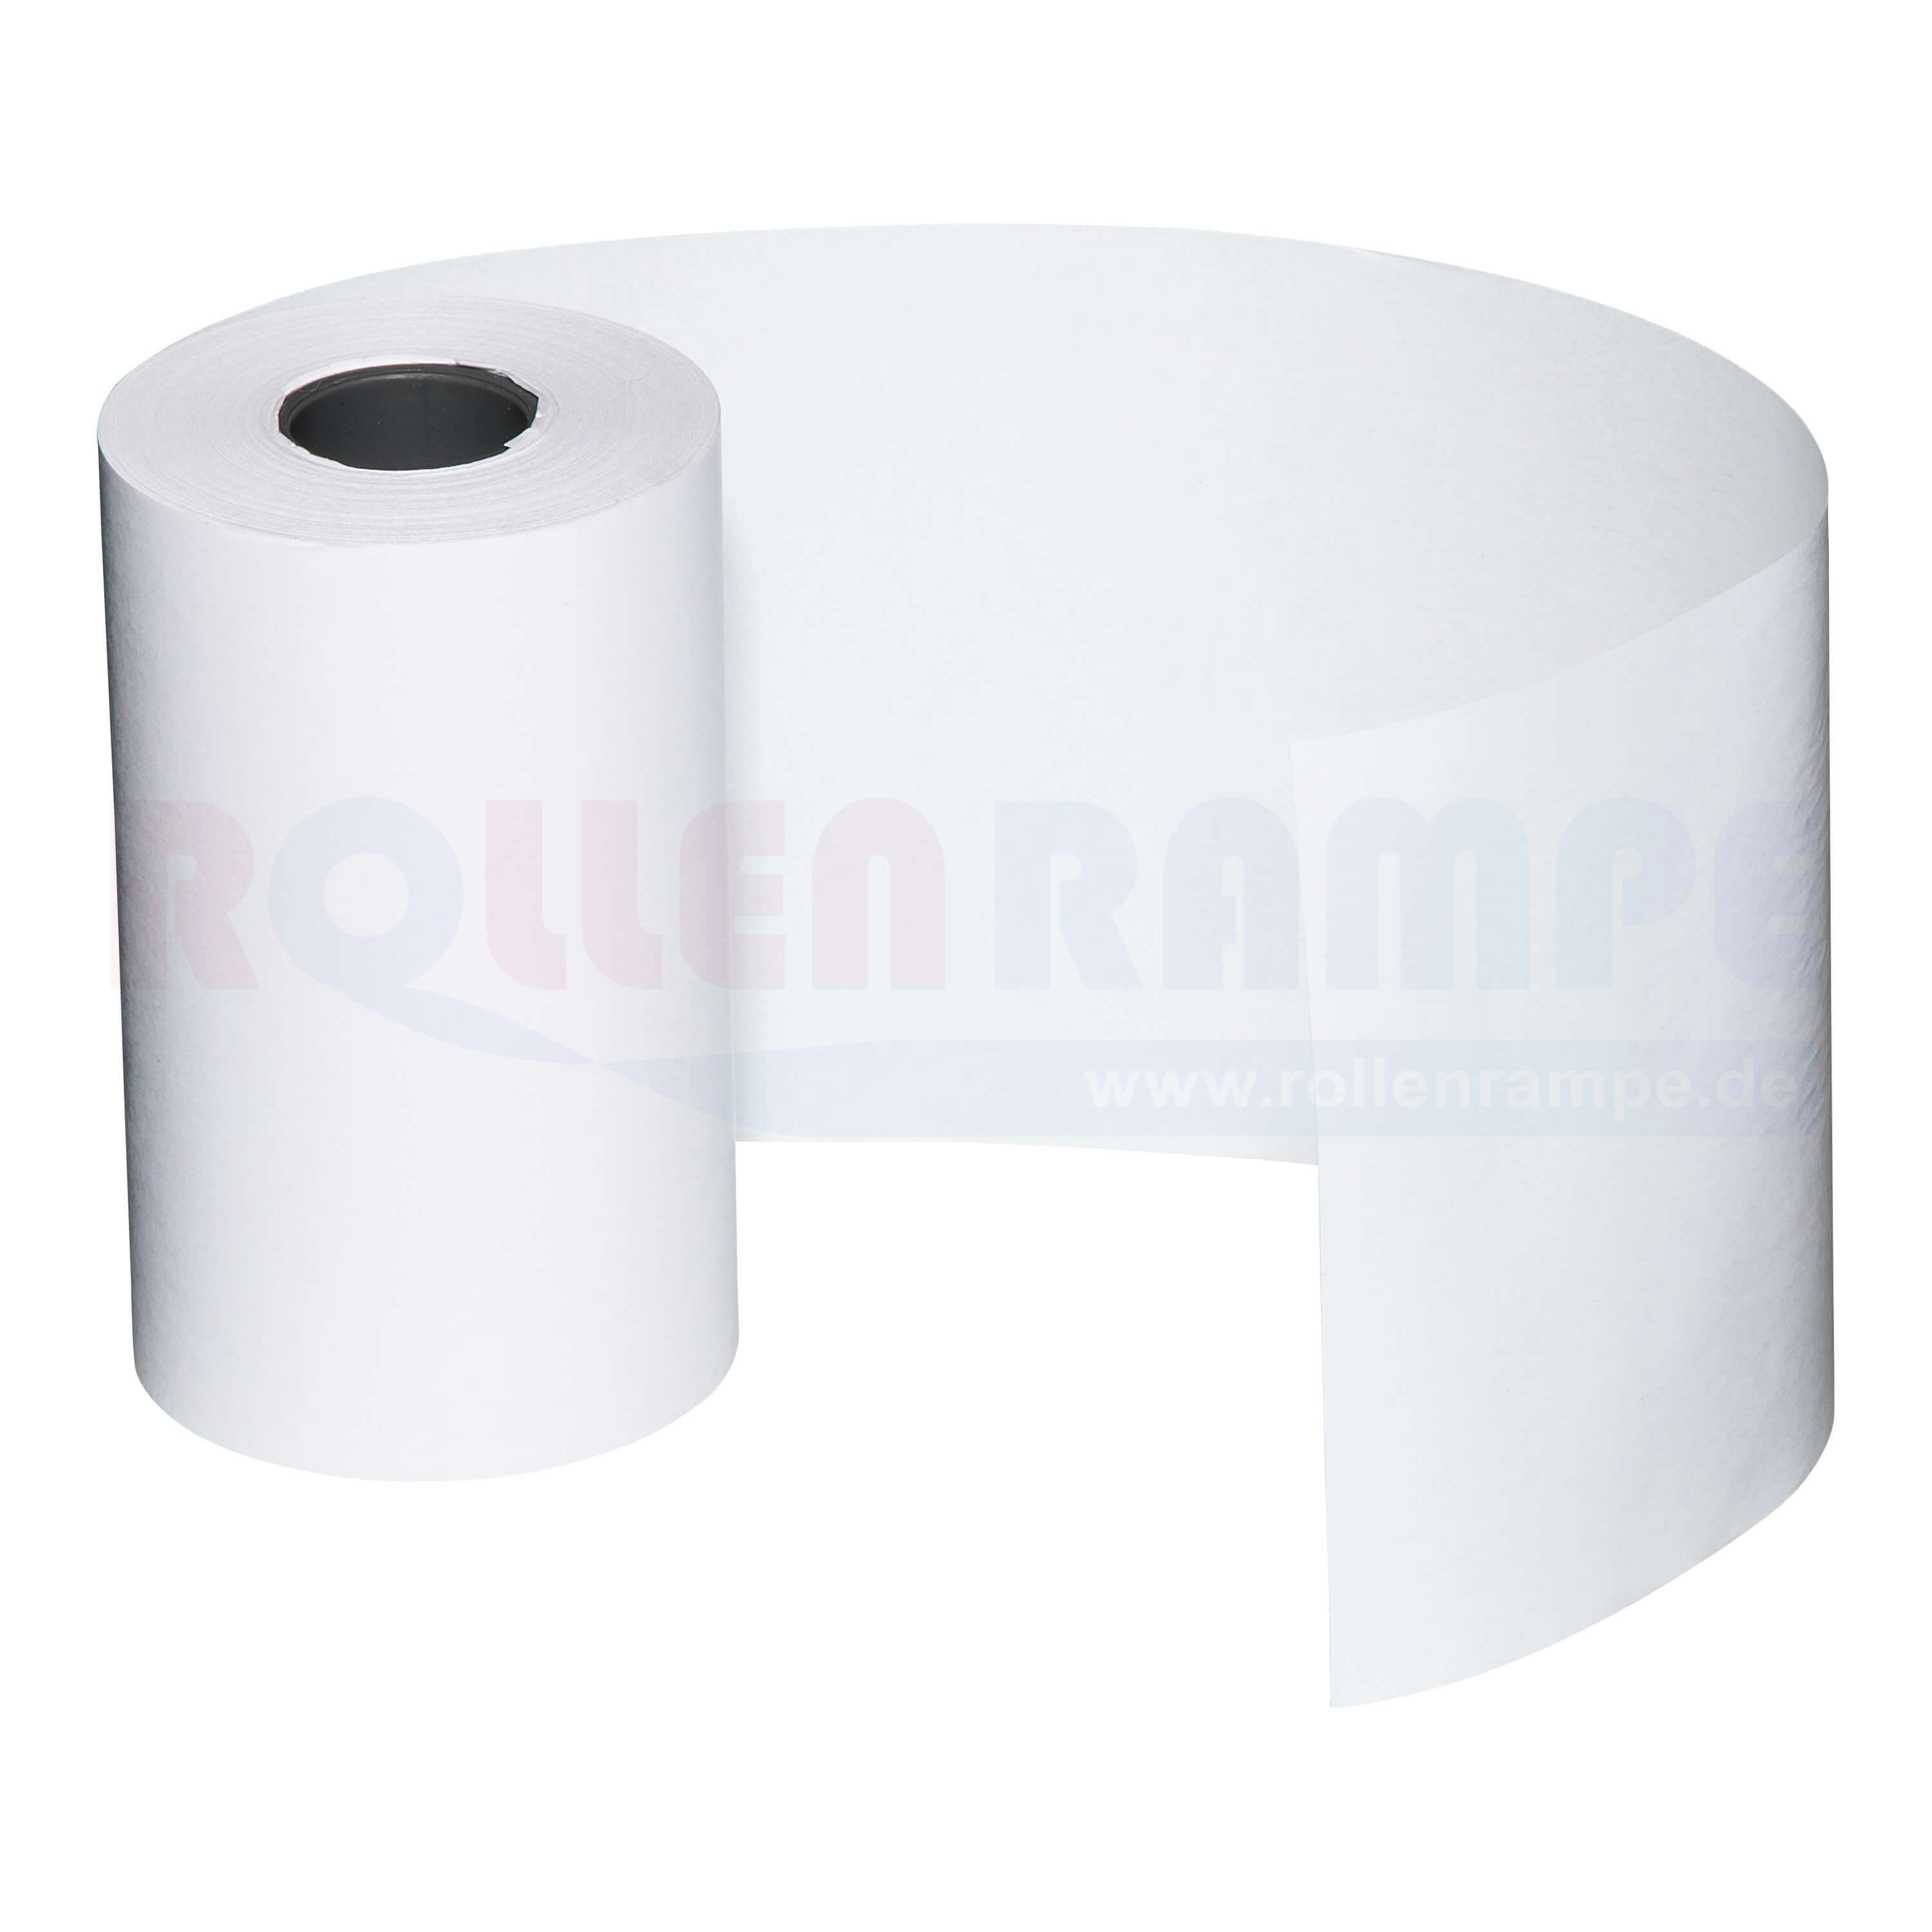 THERMOROLLE 5725: Thermal rolls, set of 5, 25 m, 57 mm at reichelt  elektronik